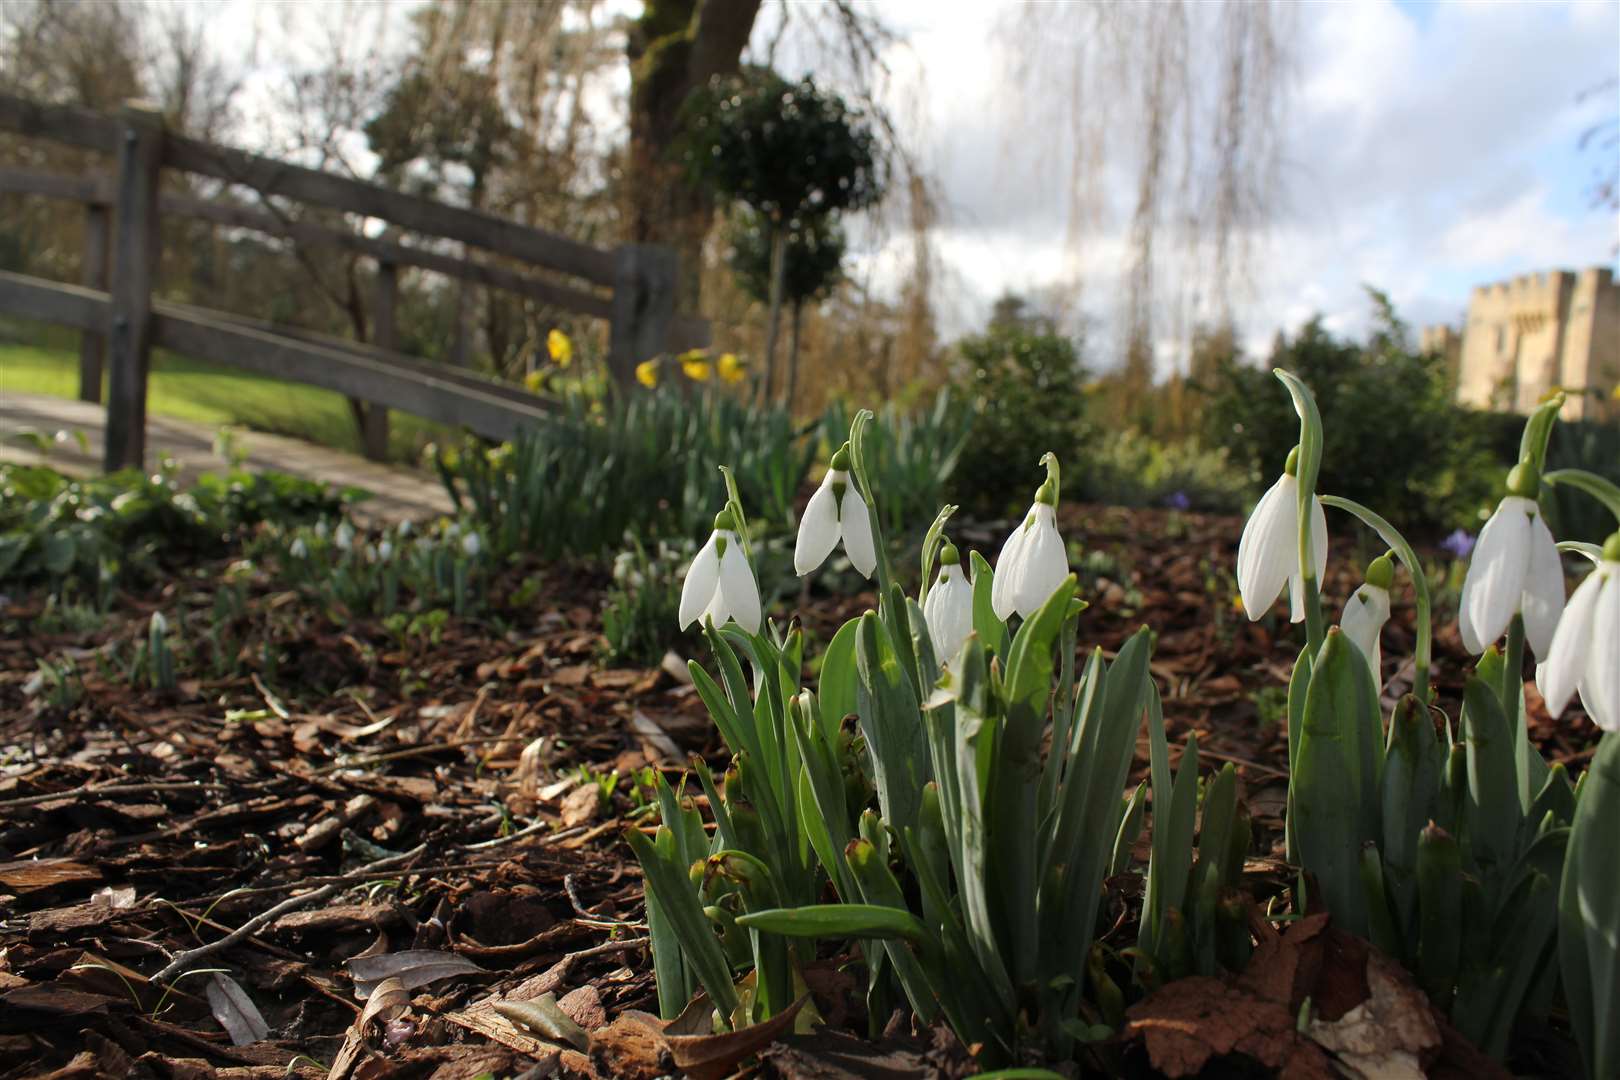 Snowdrops at Hever